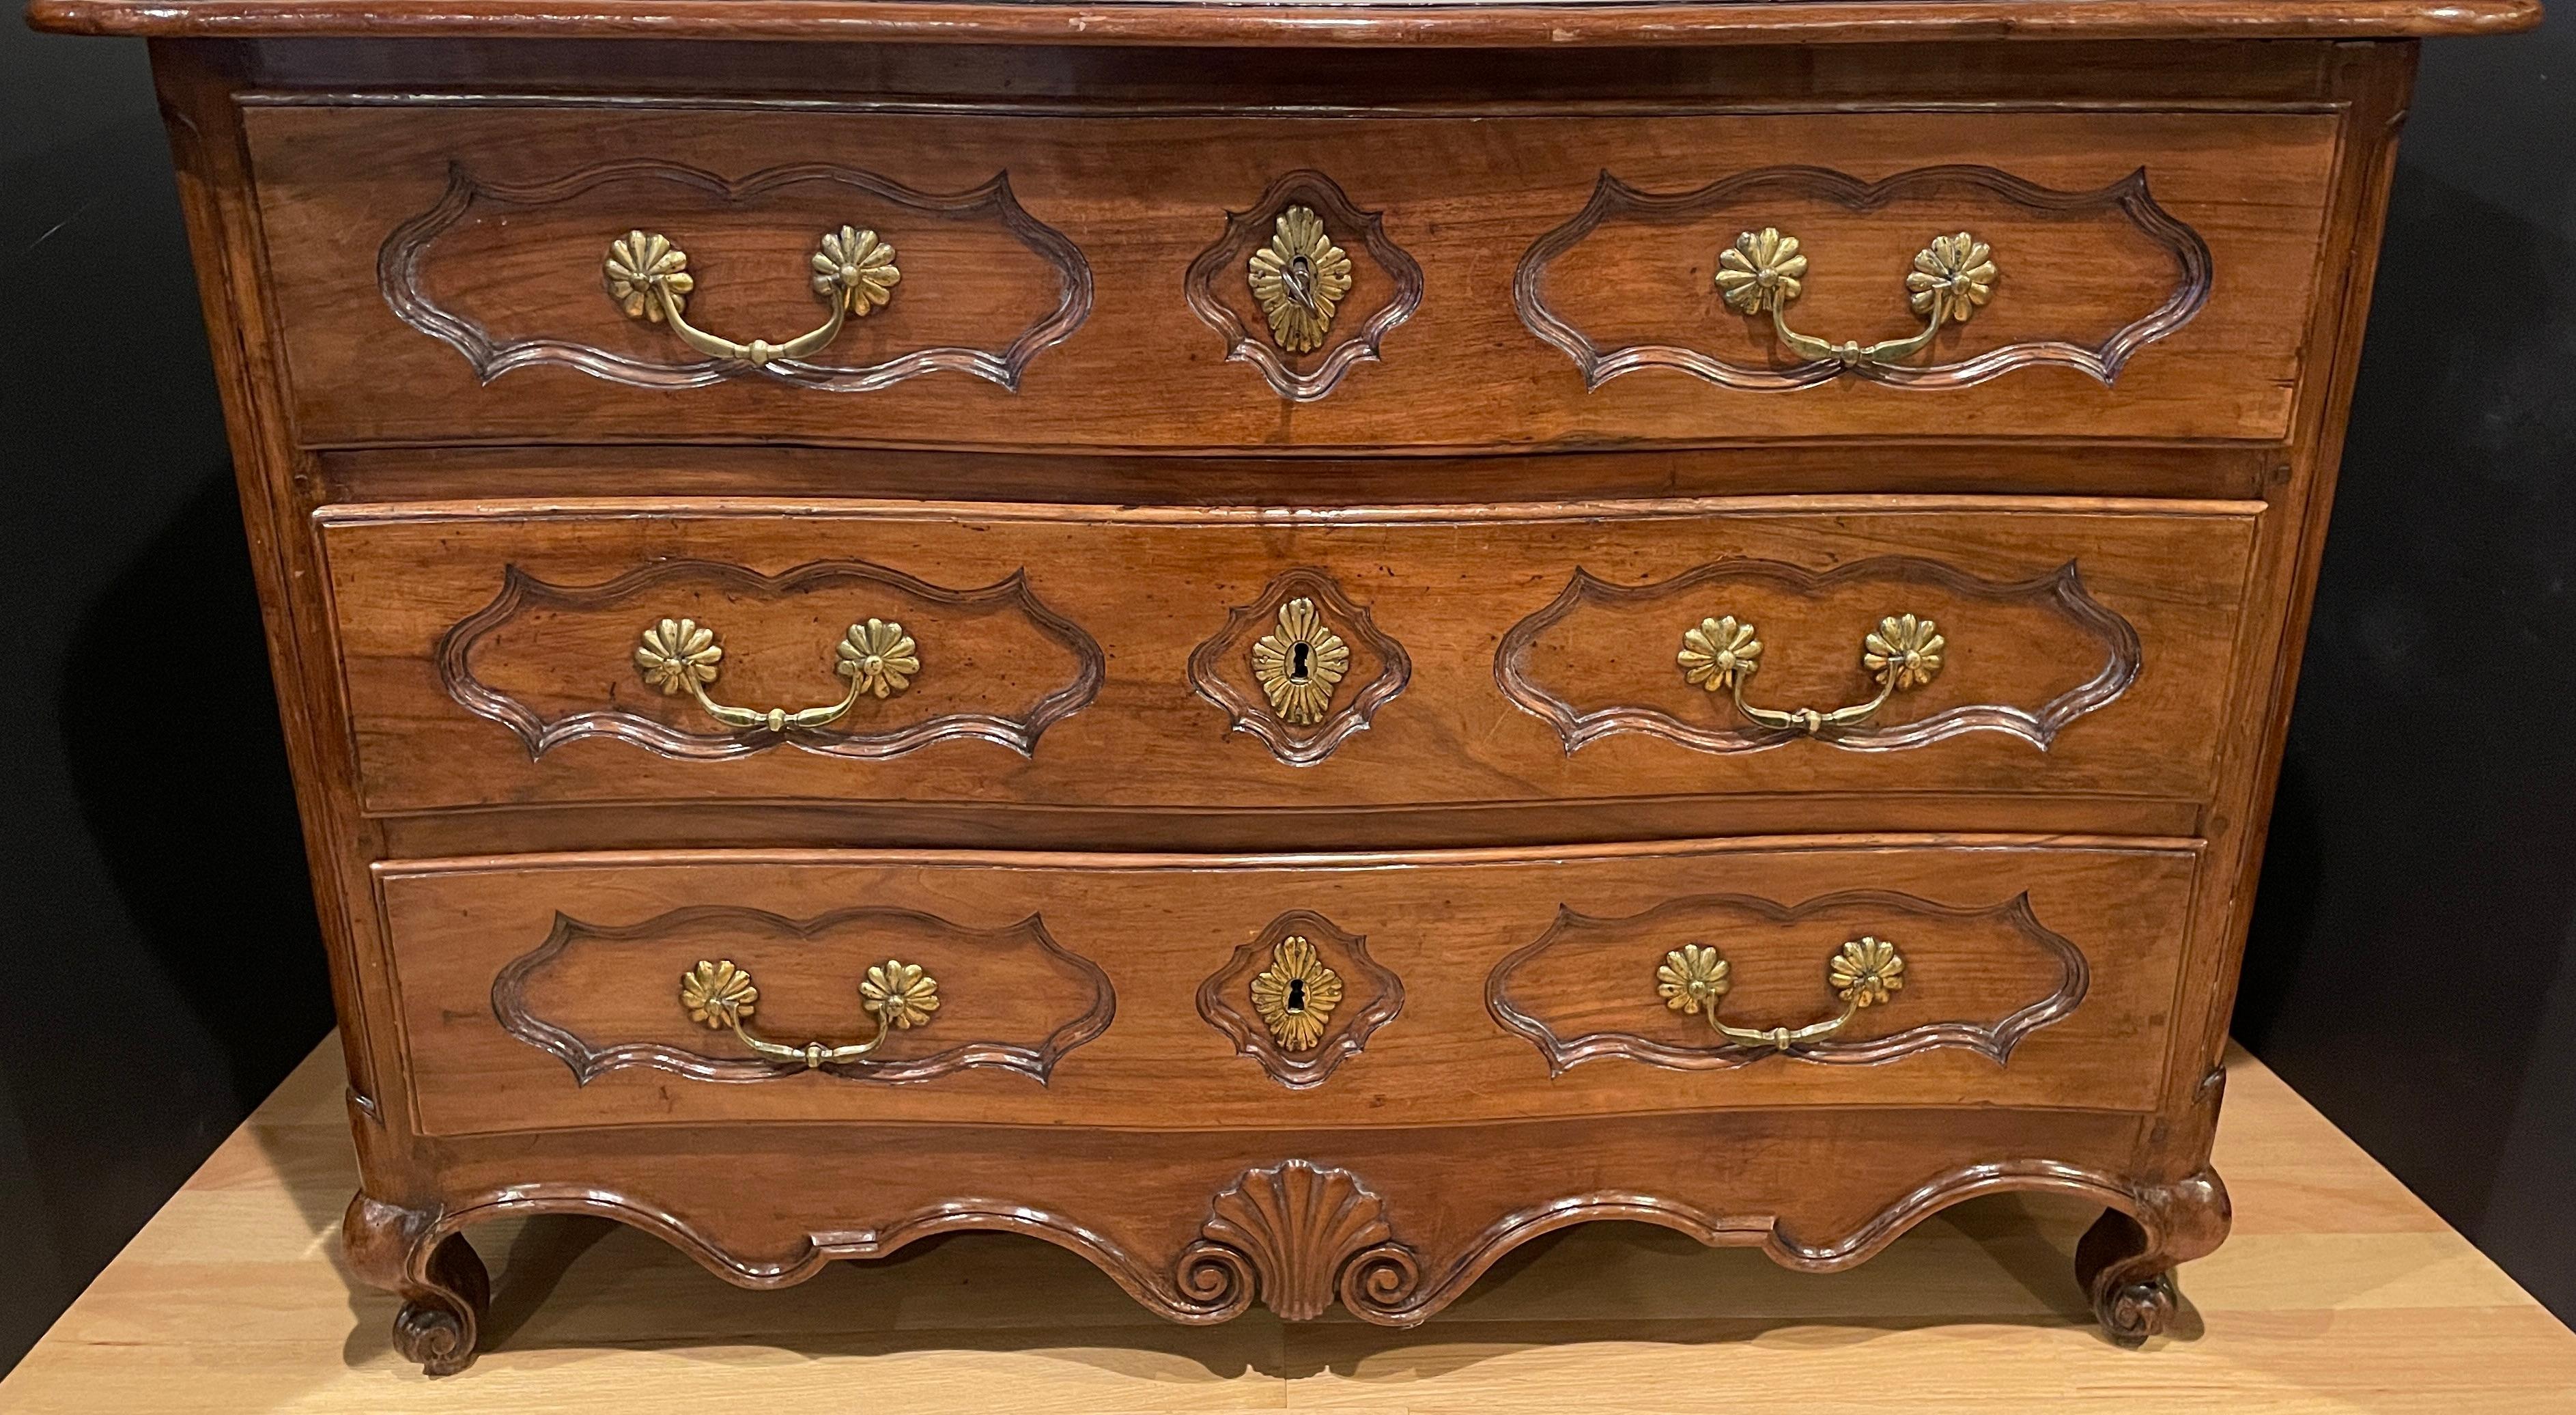 French 18th Century Walnut Louis XV Period Commode In Good Condition For Sale In Norwood, NJ